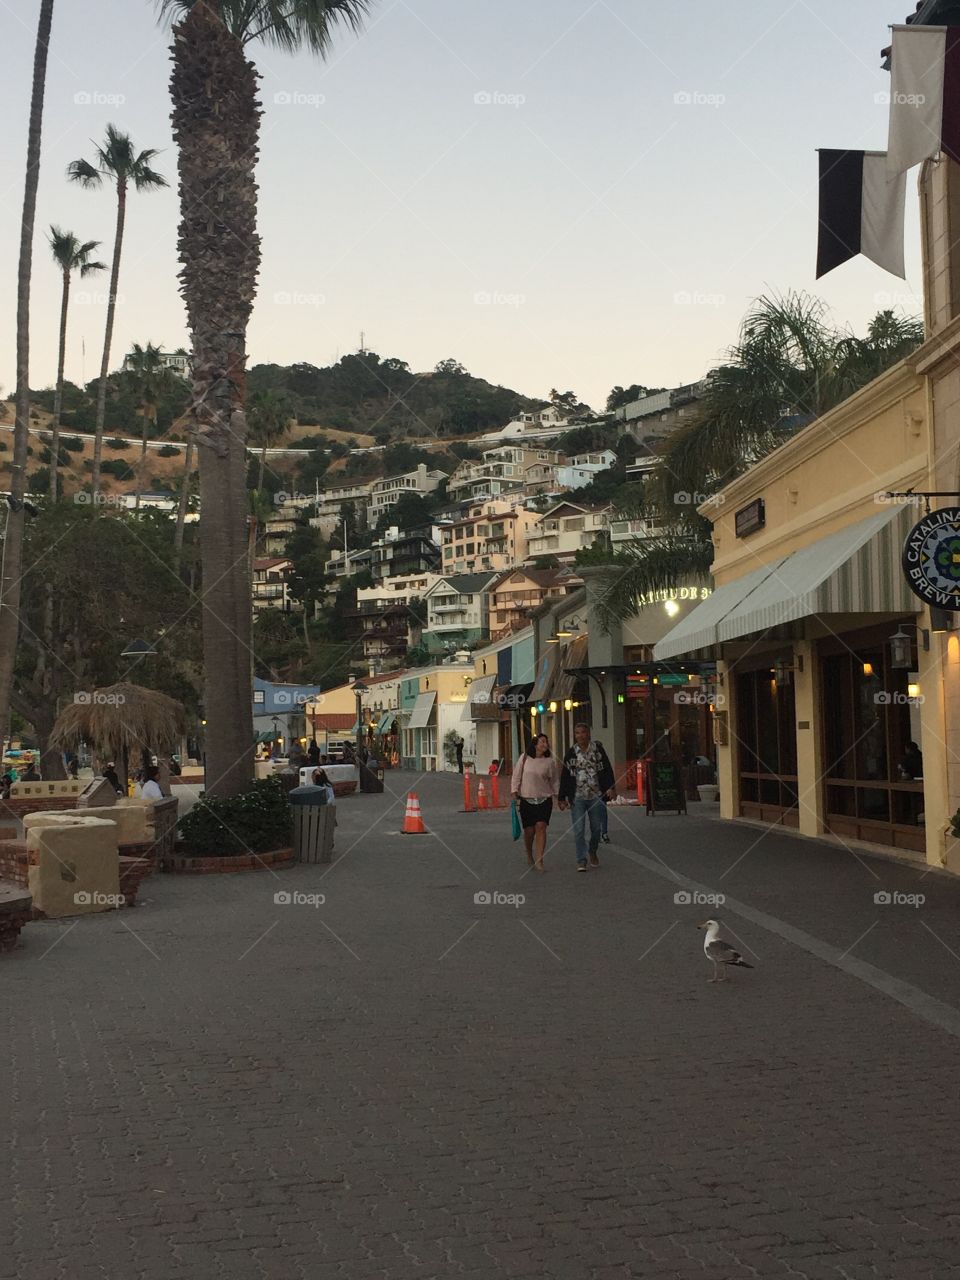 A couple walking on Catalina island with the awesome houses perched in the hills